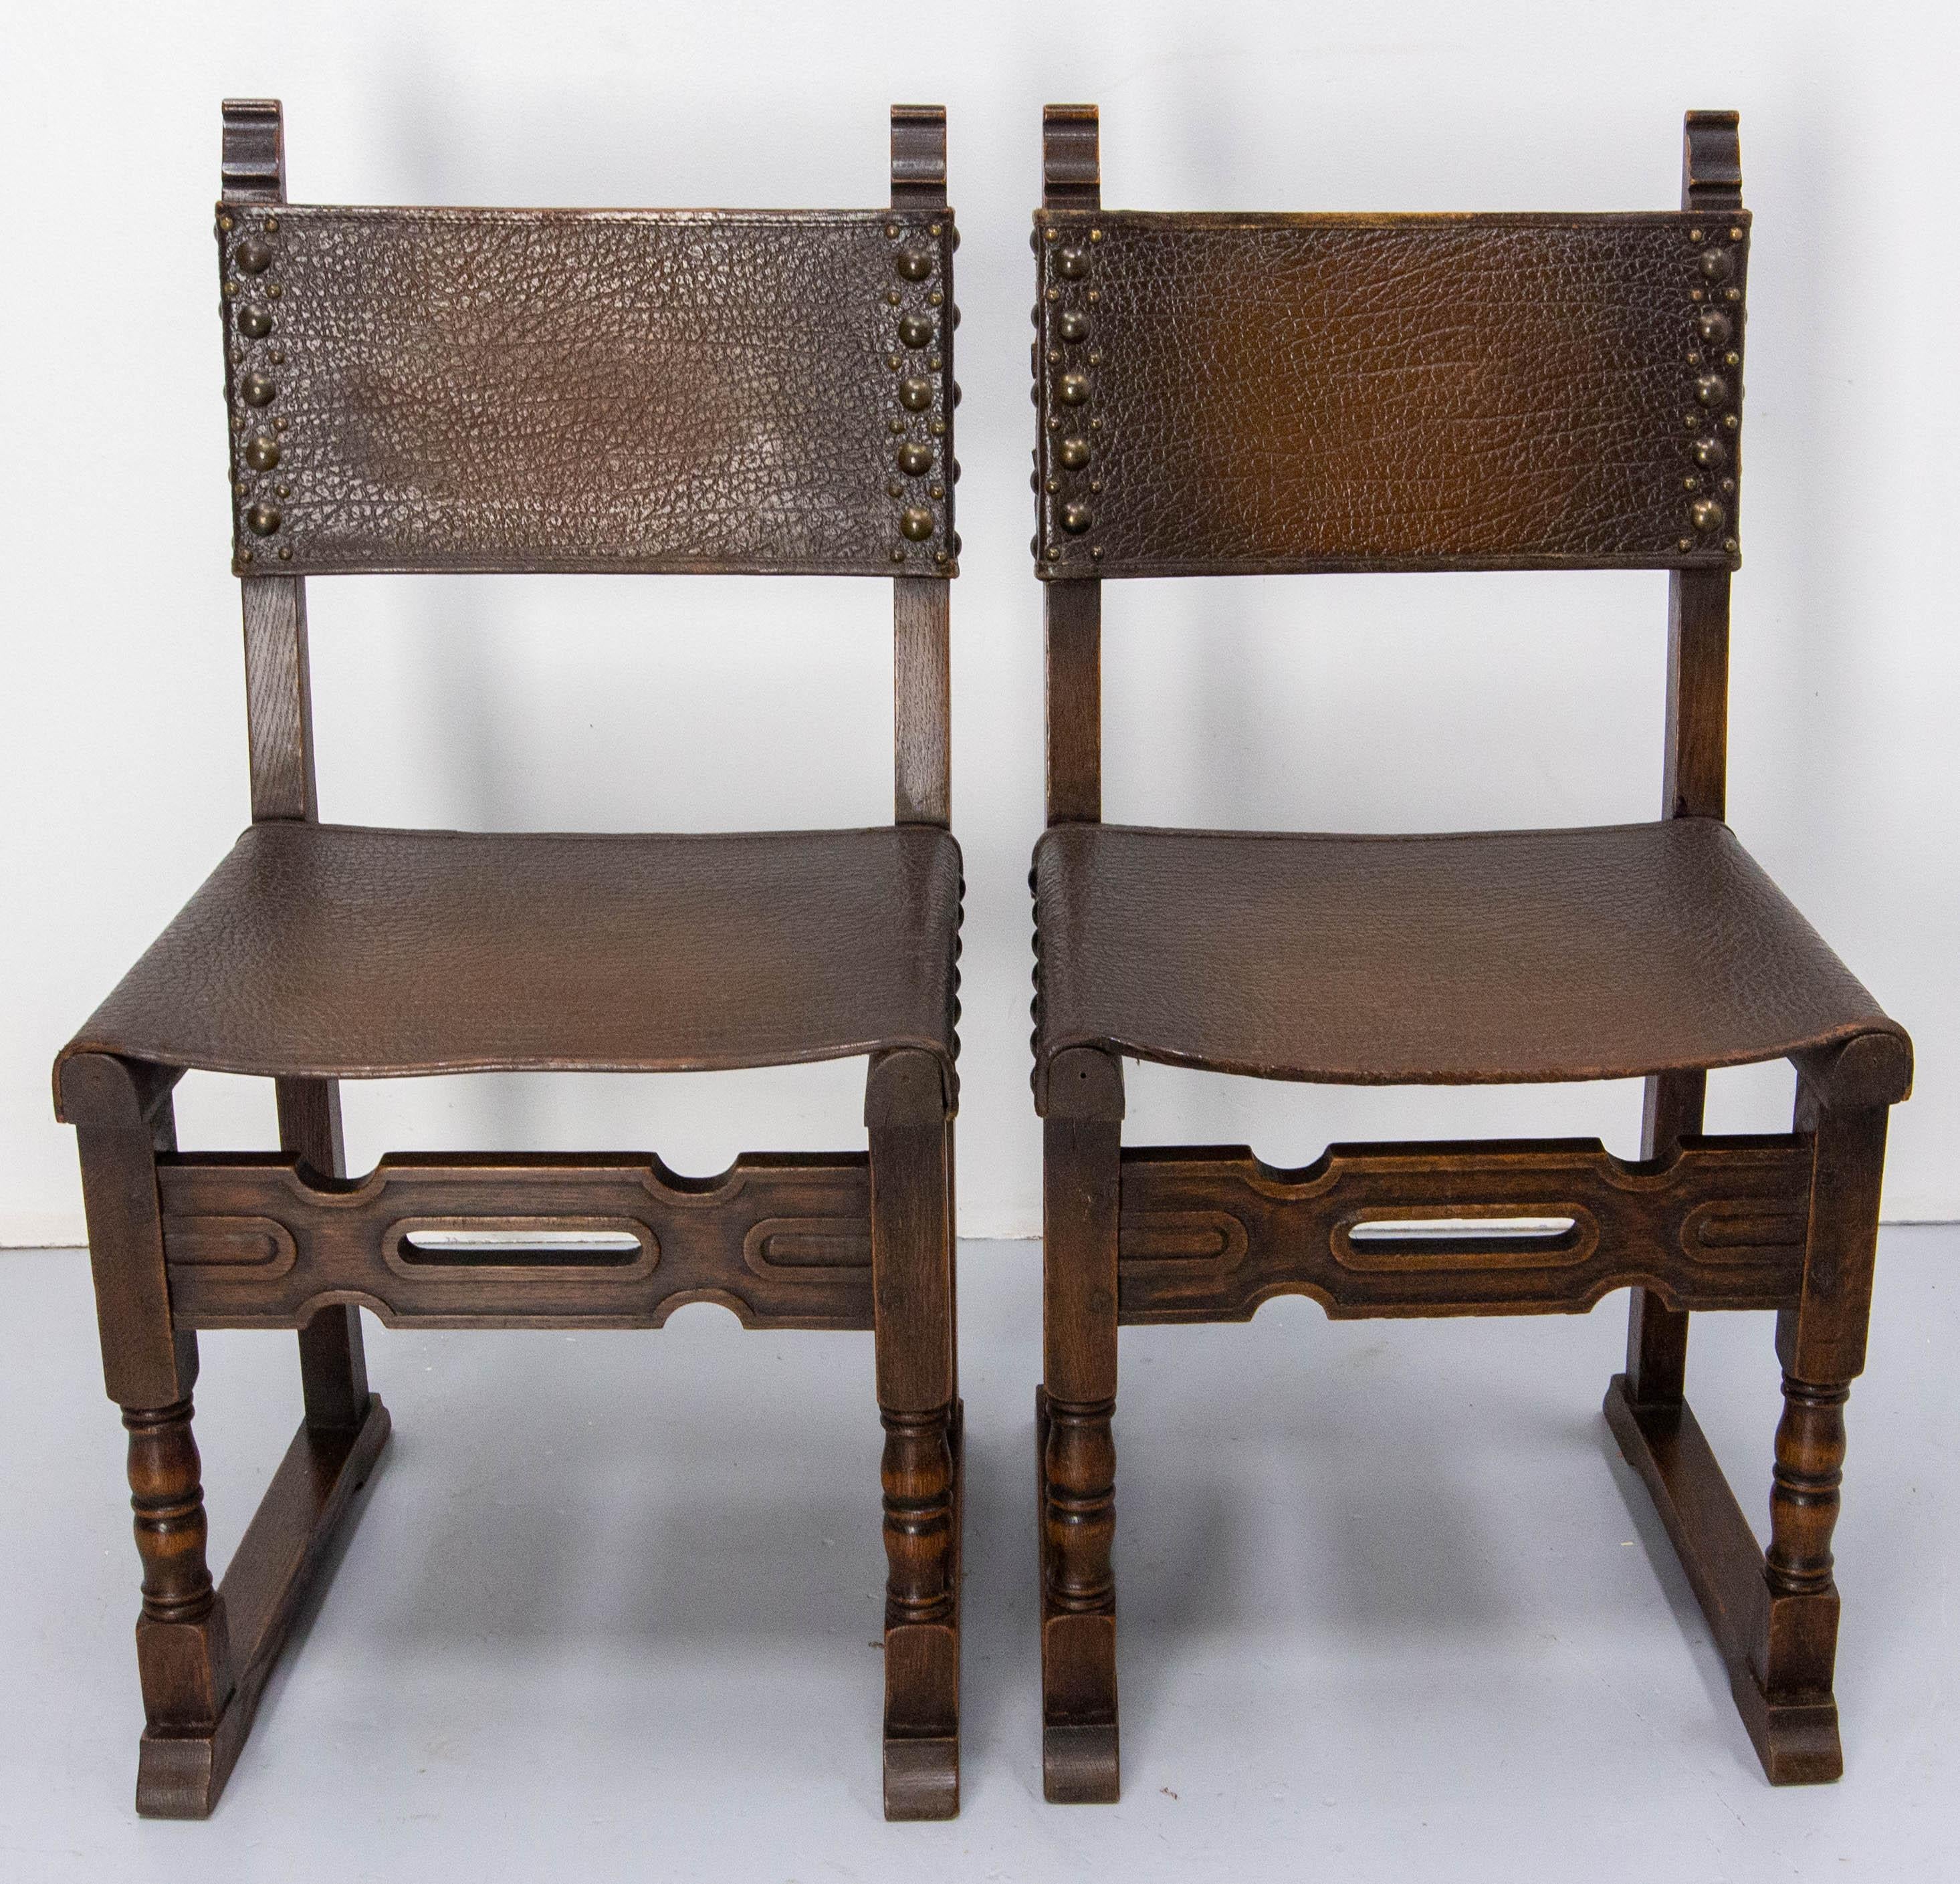 Six Dining Chairs Antique Mid-20th Century Spanish Studs Leather & Chestnut 1